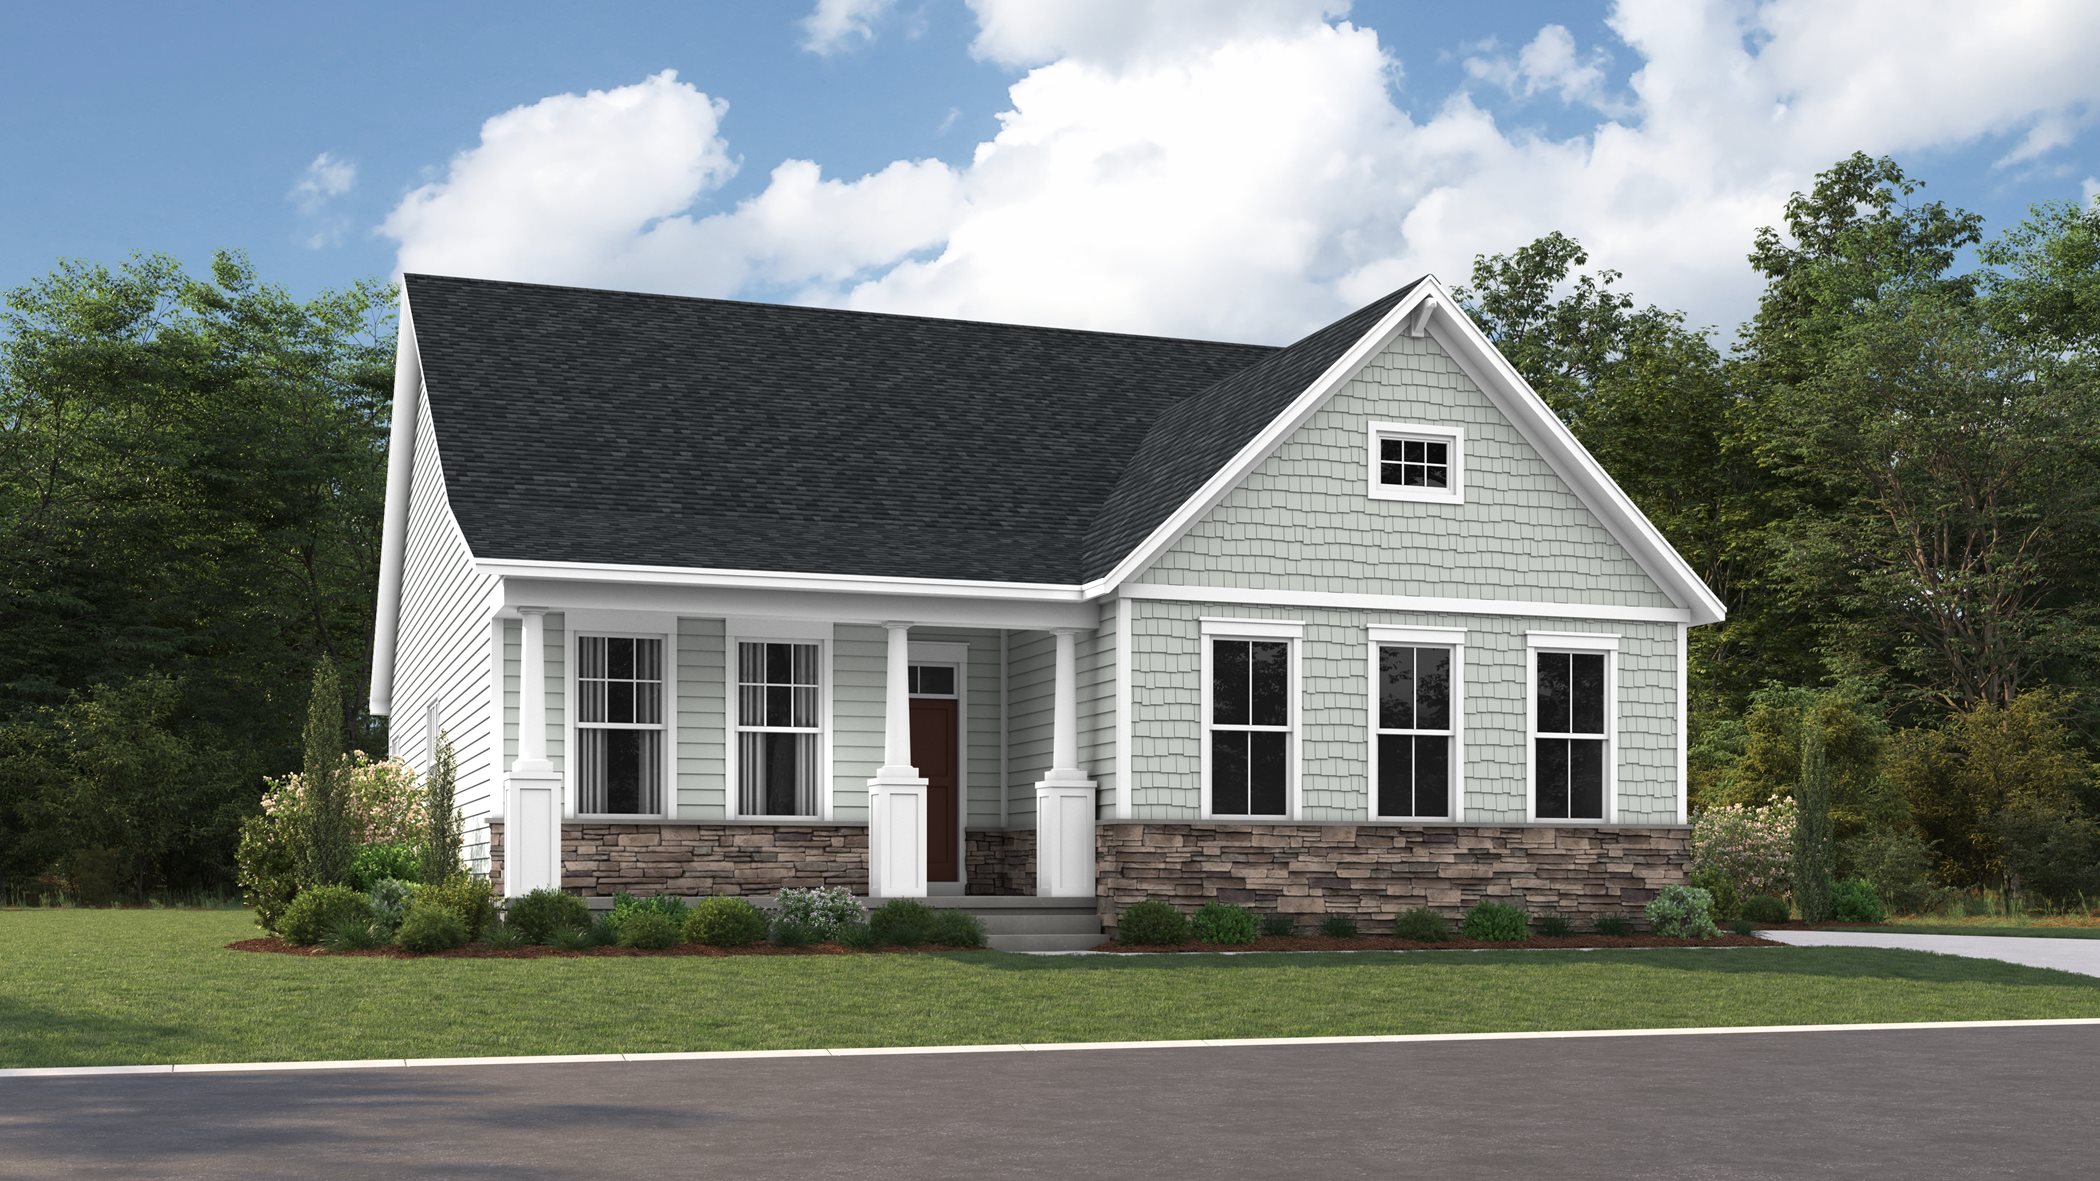  TEXT: Lexington Craftsman with Stone Watertable IMAGE; Exterior Rendering of Lexington Craftsman with Stonewatertable at Harpers Mill 